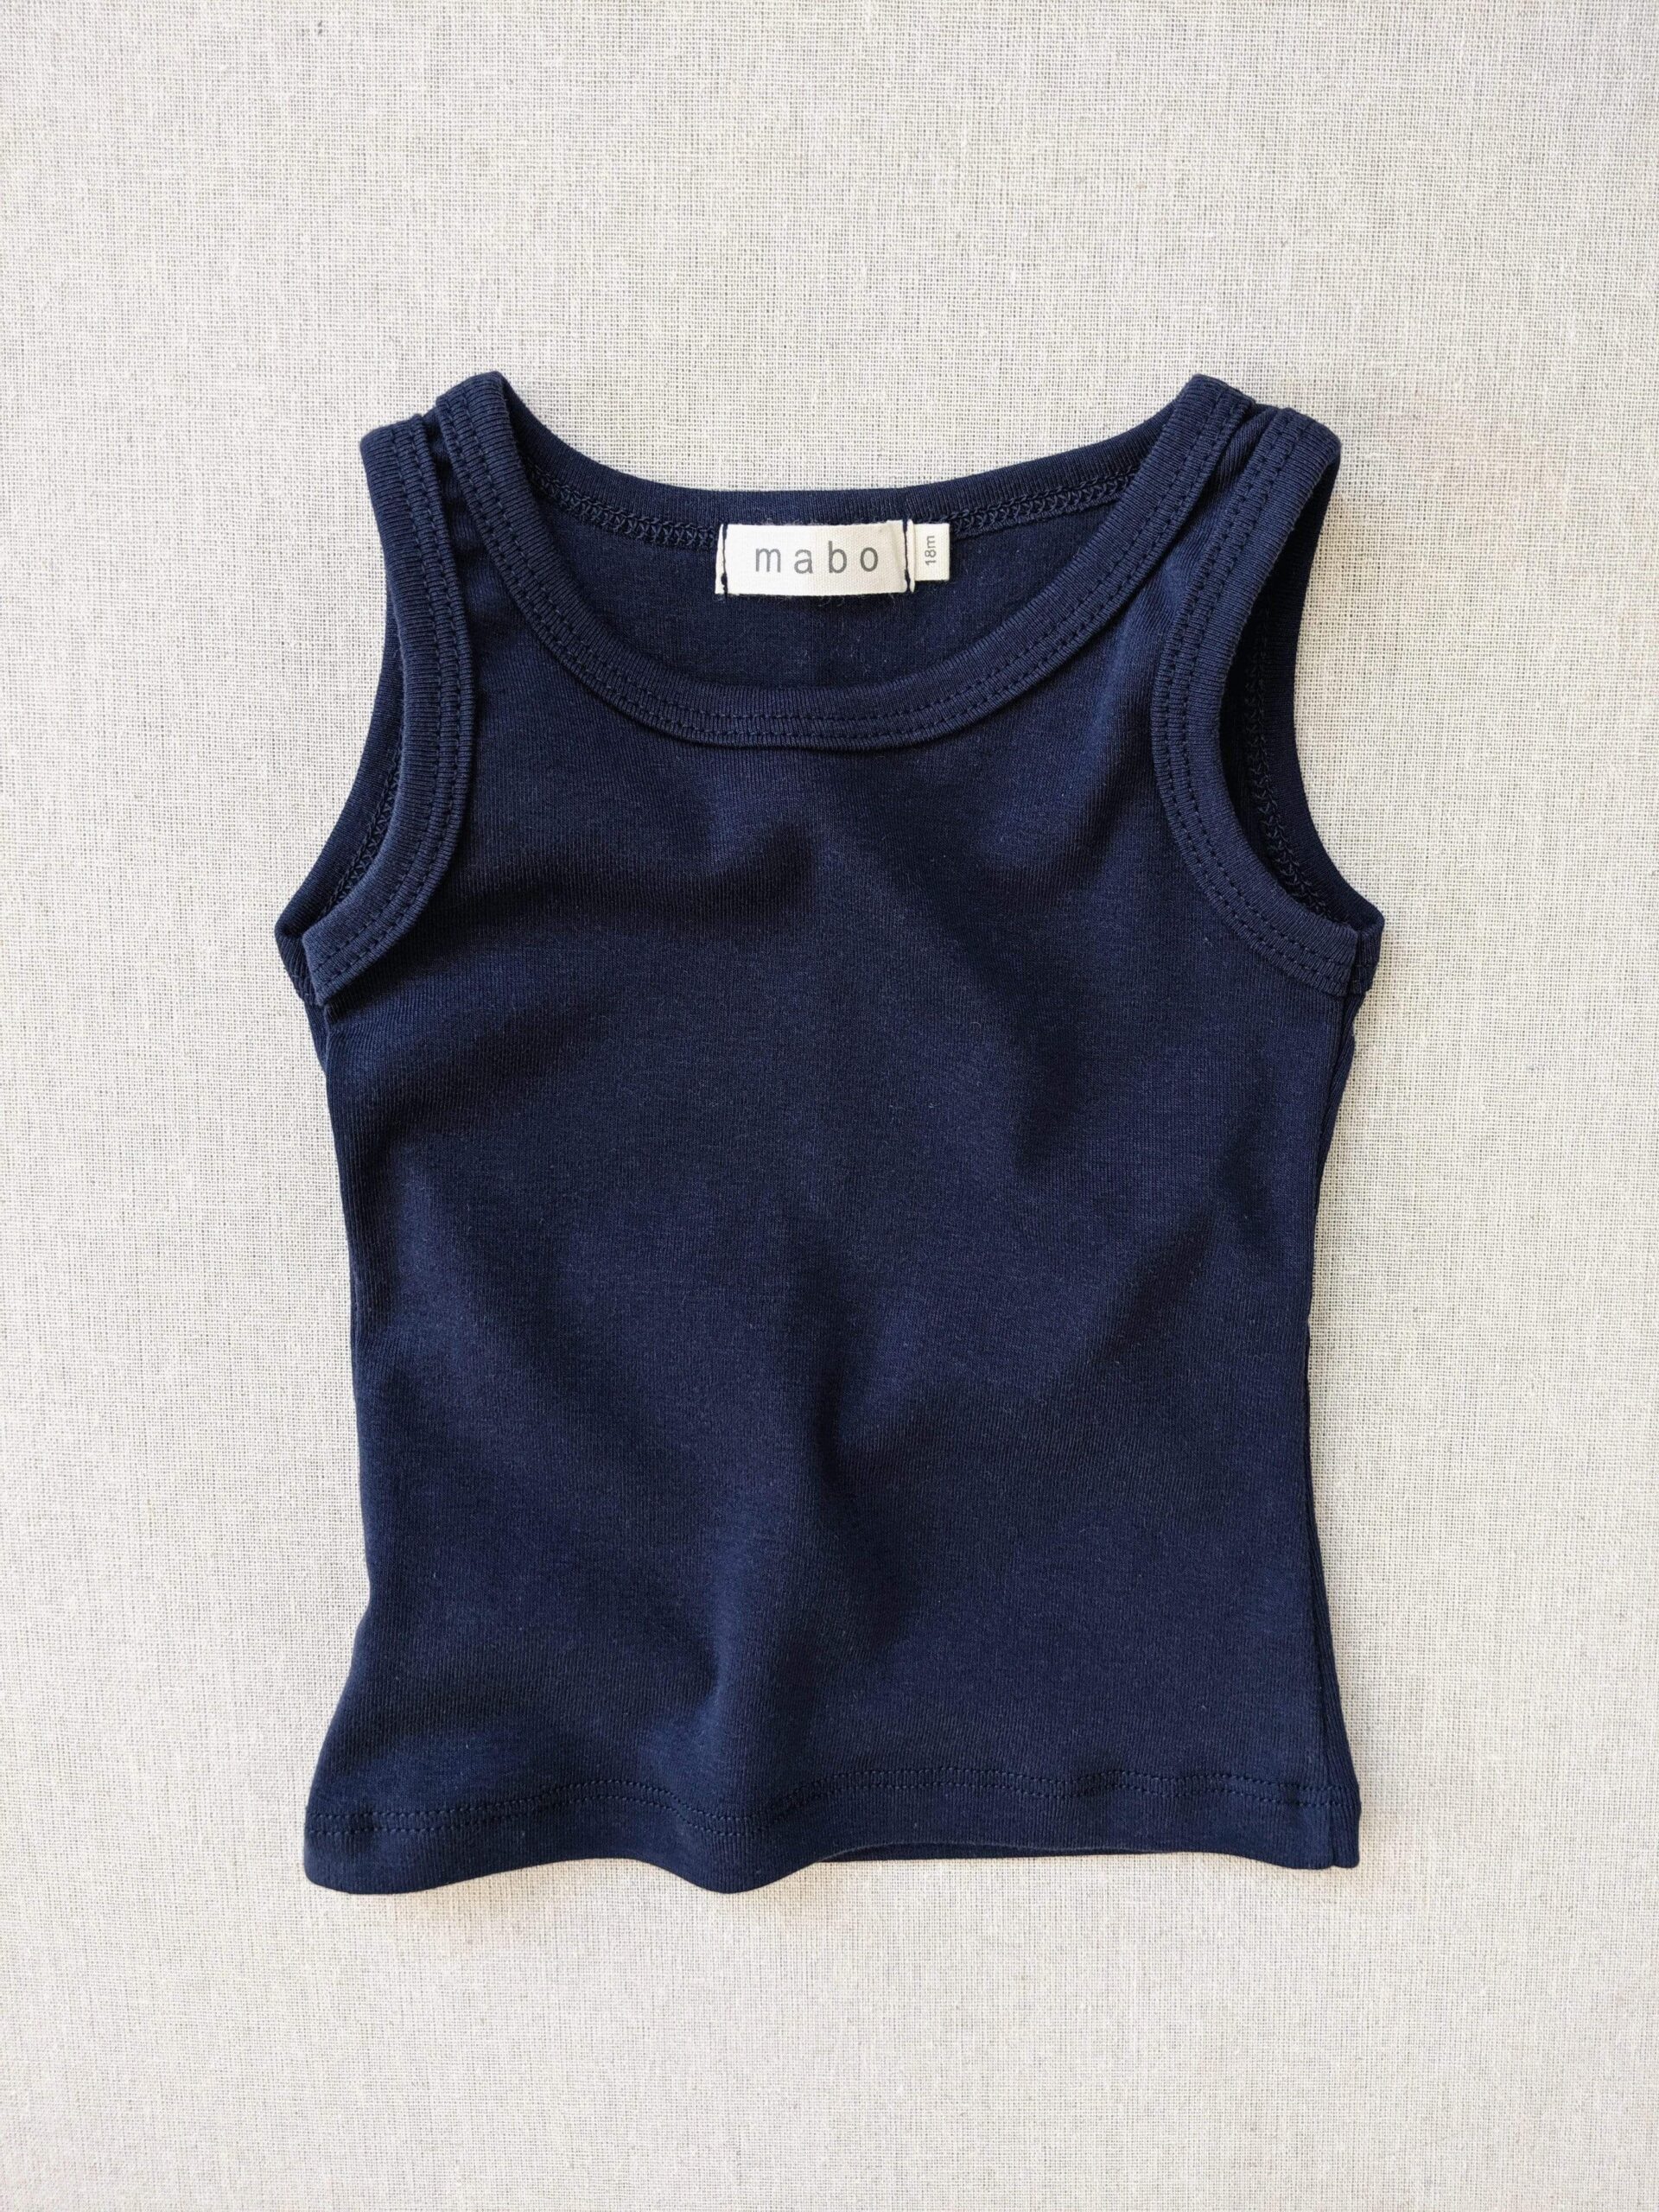 Stay Cool and Stylish: The Best Long Tank
Tops for Summer